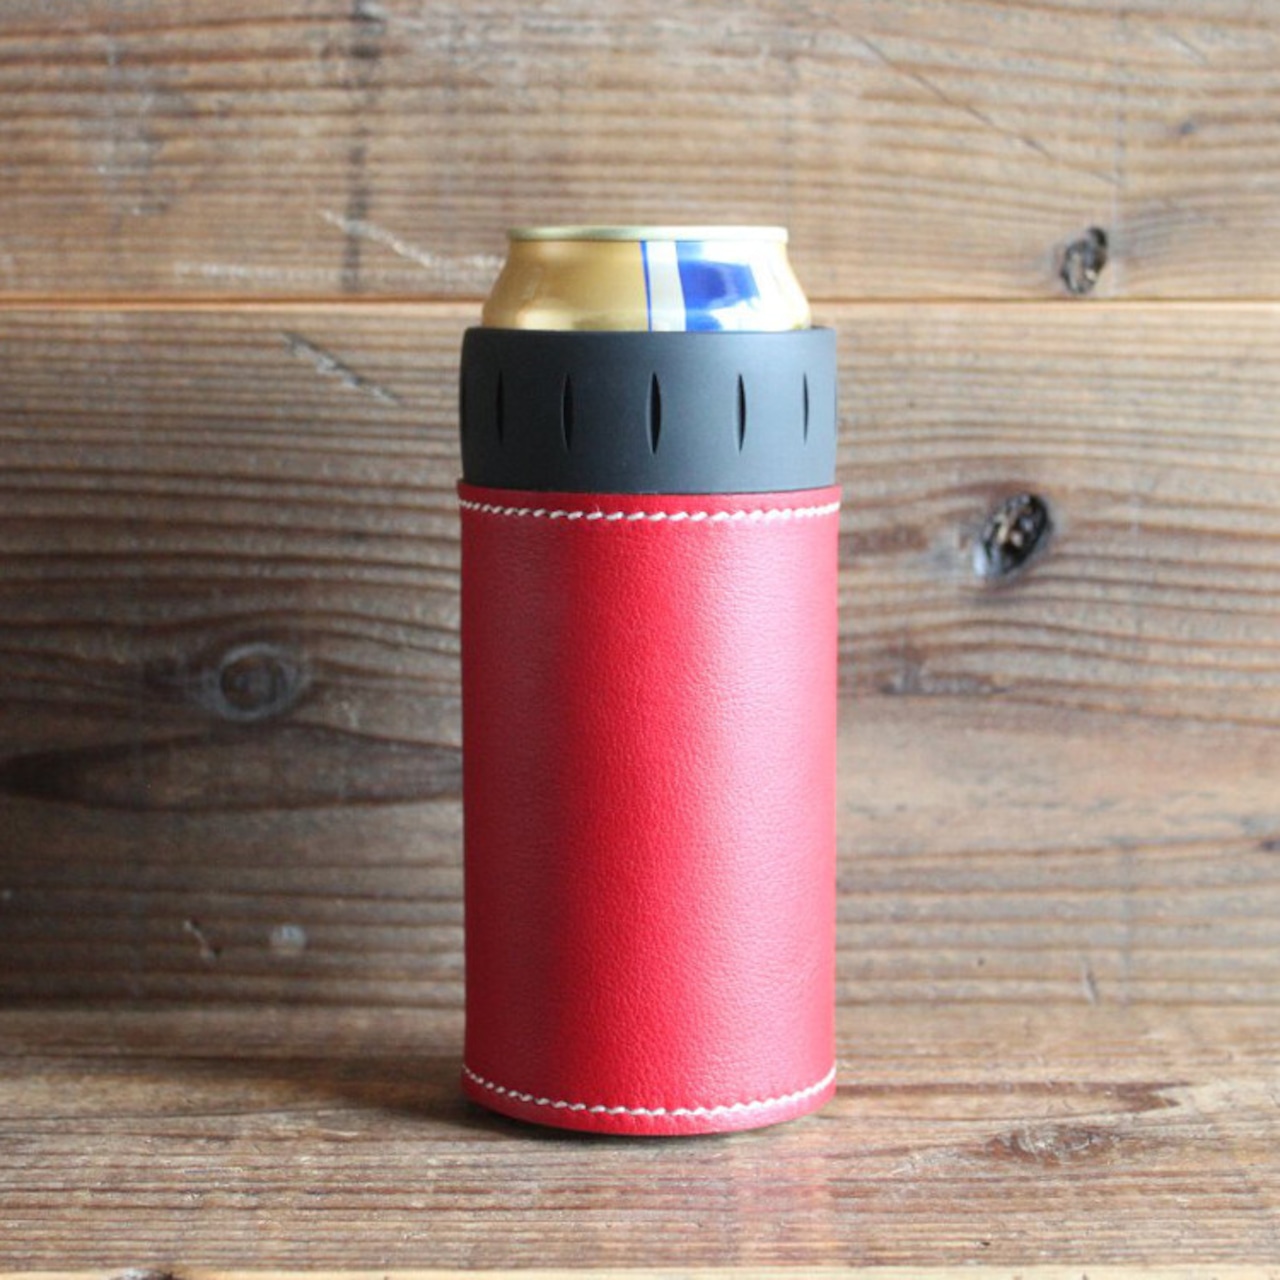 What will be will be & Greenfield サーモス THERMOS 保冷缶 ホルダー レザー カバー 500ml